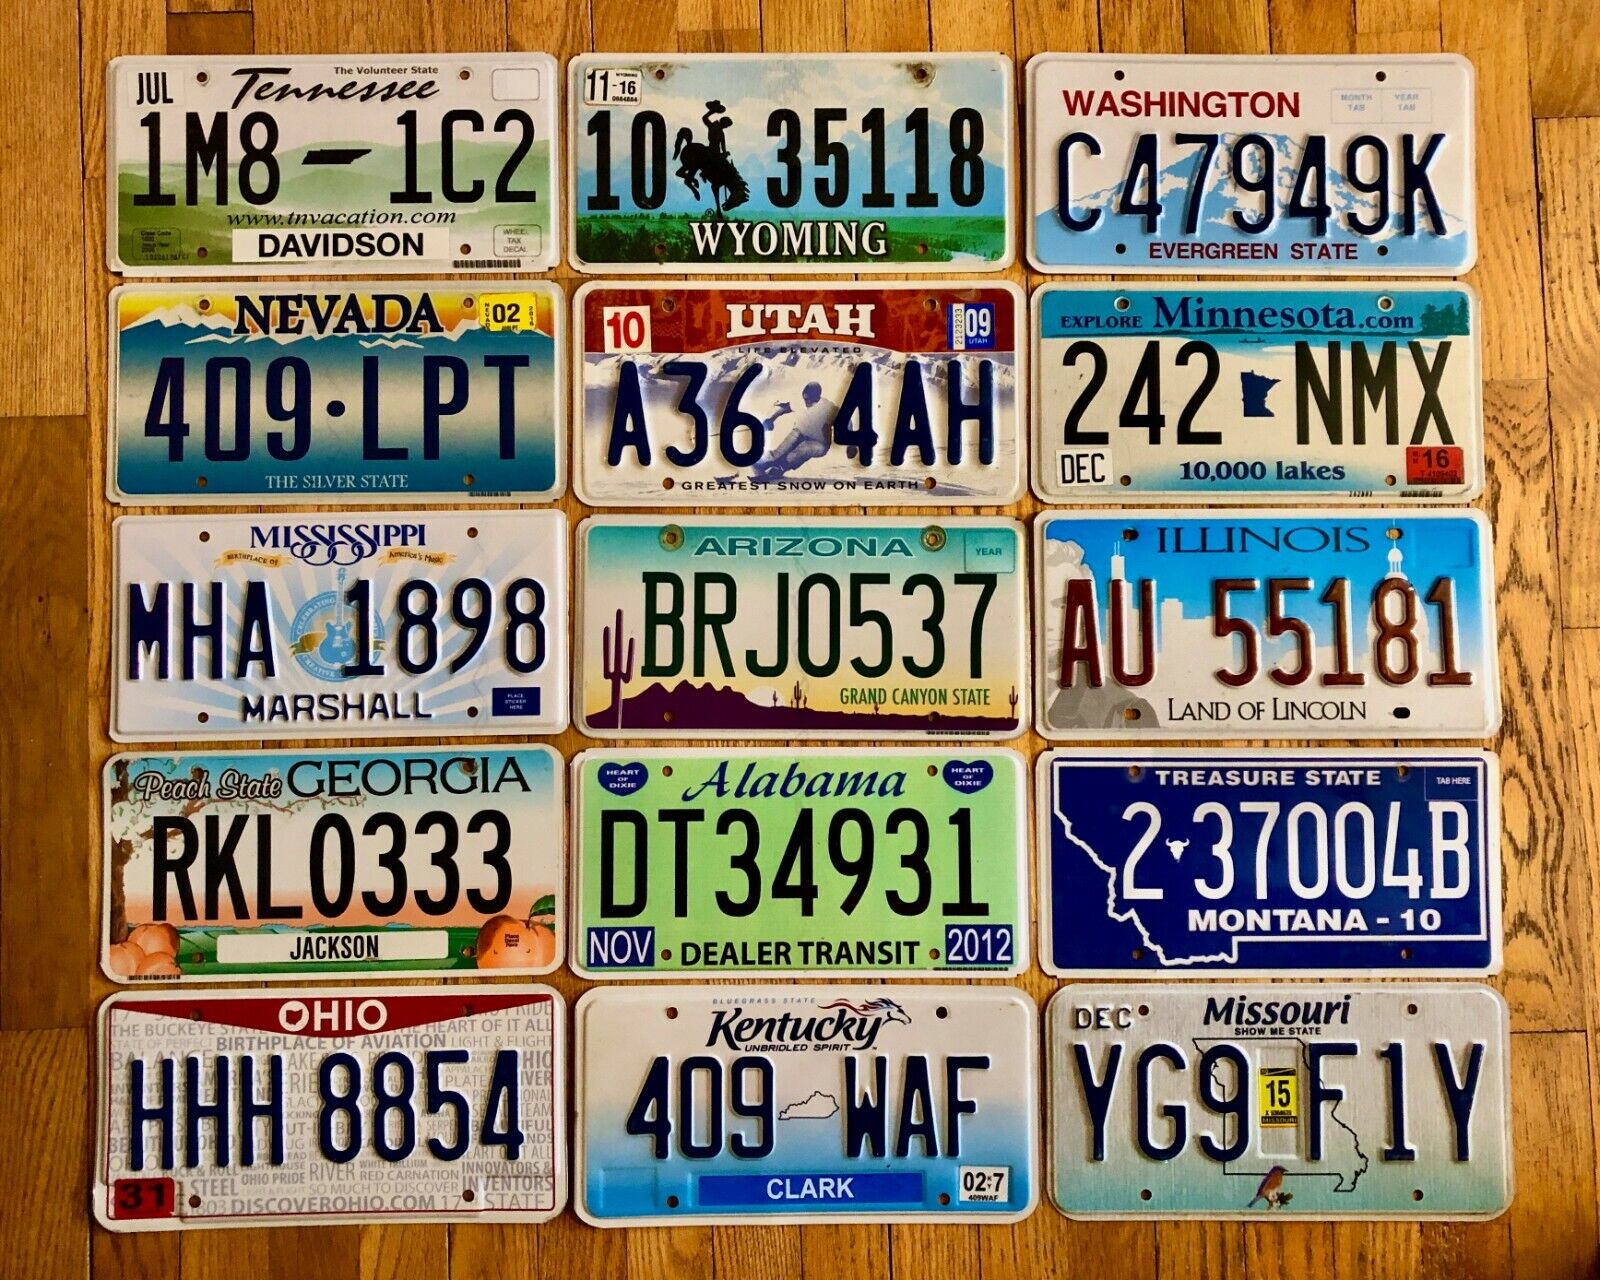 Set of 15 Colorful/Graphic License Plates From 15 Different States